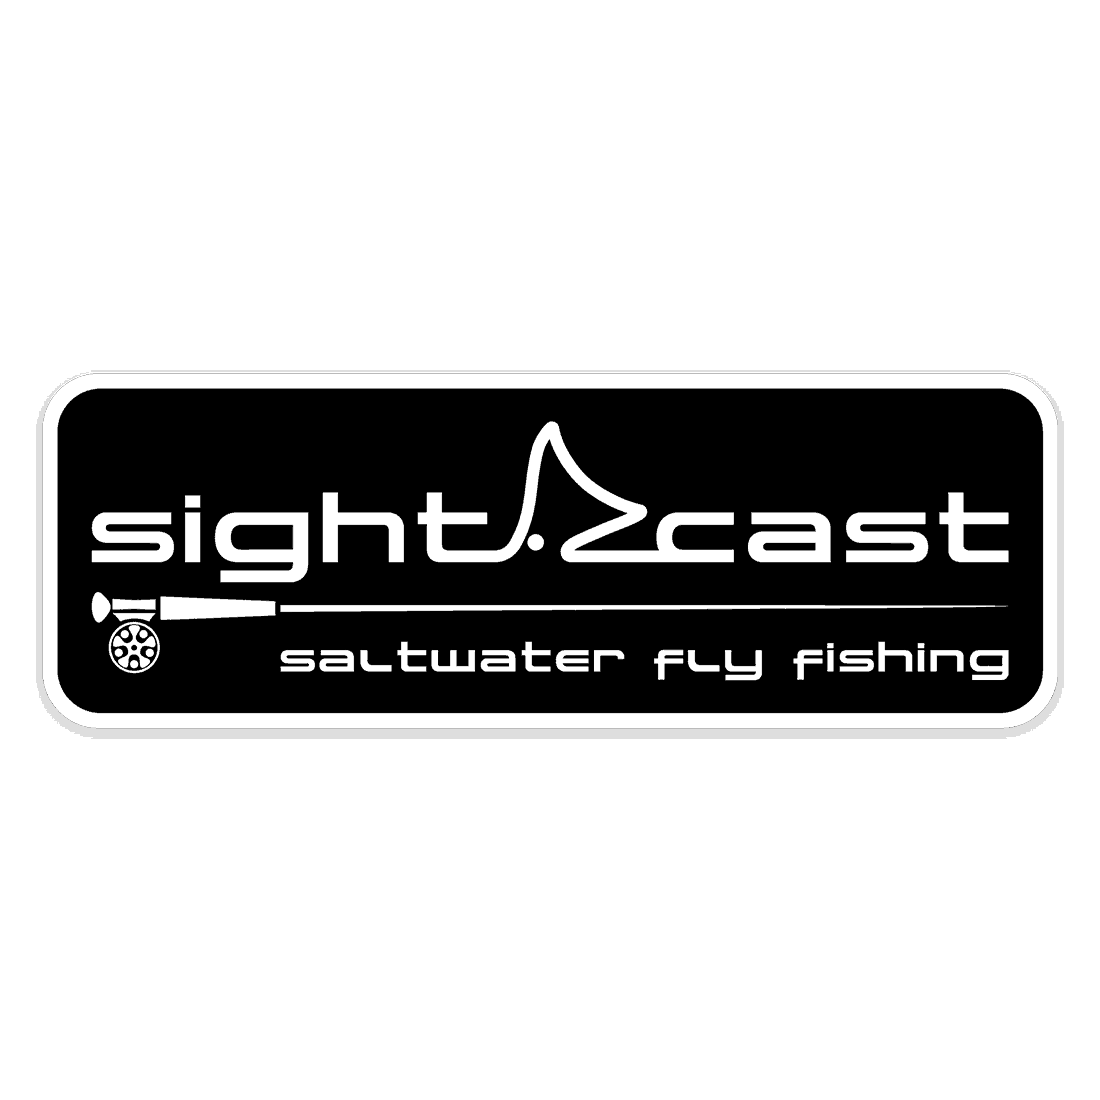 Sight Cast Fishing Company - Specializing in Saltwater Fly Fishing